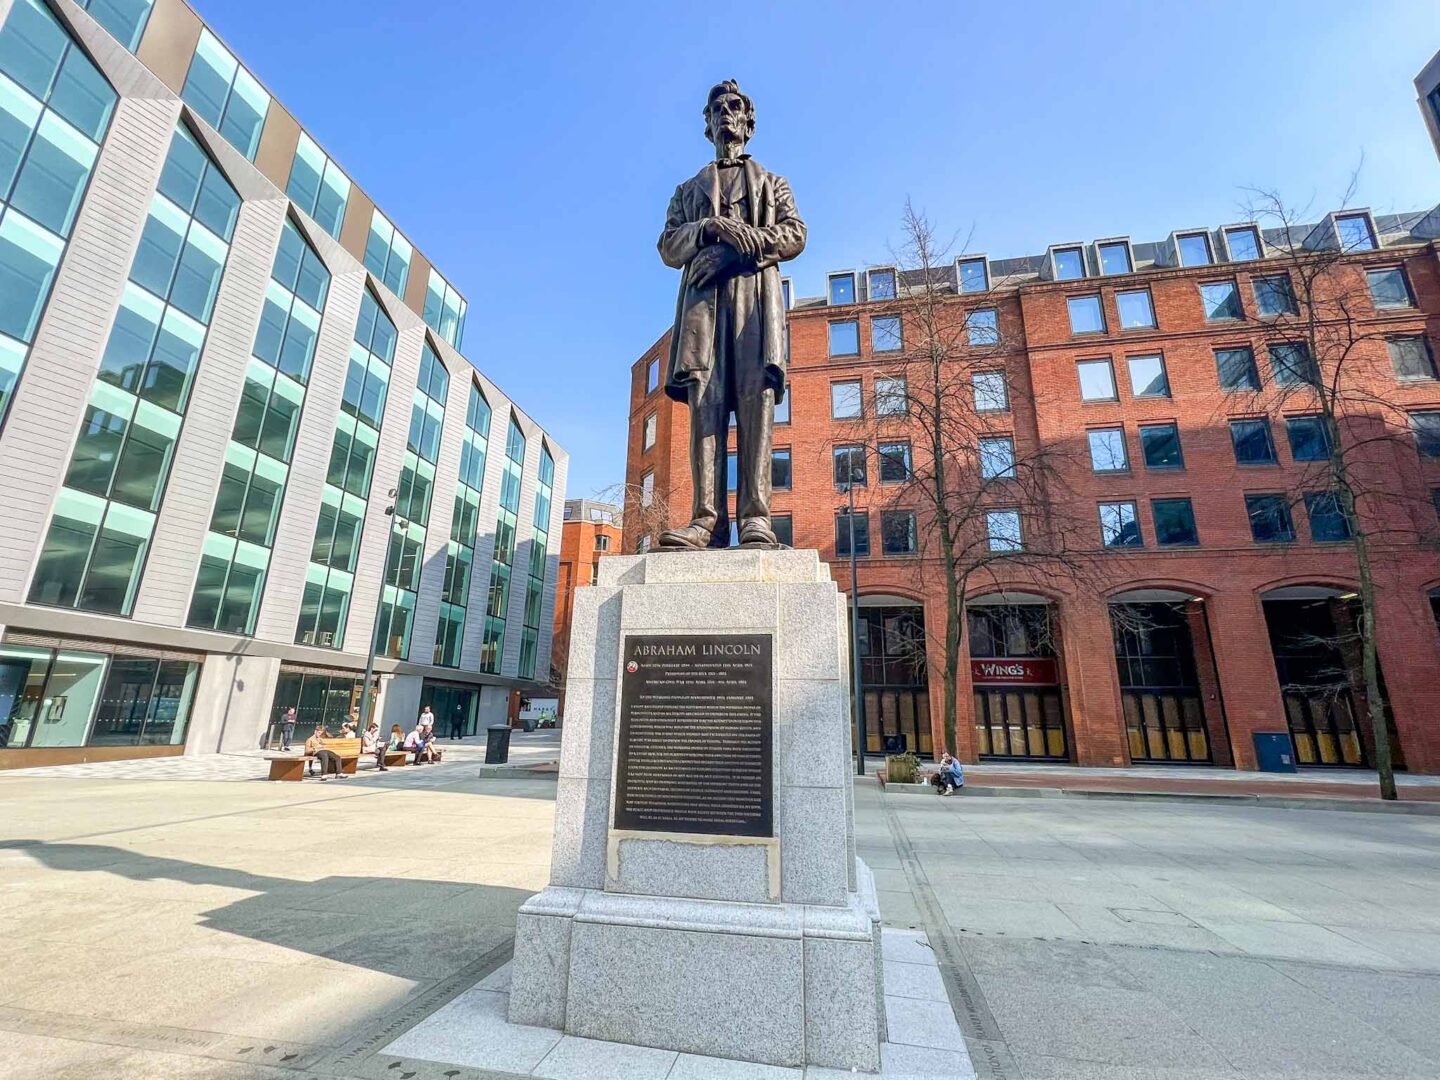 Statue of Abraham Lincoln in Manchester City Centre, one day in Manchester